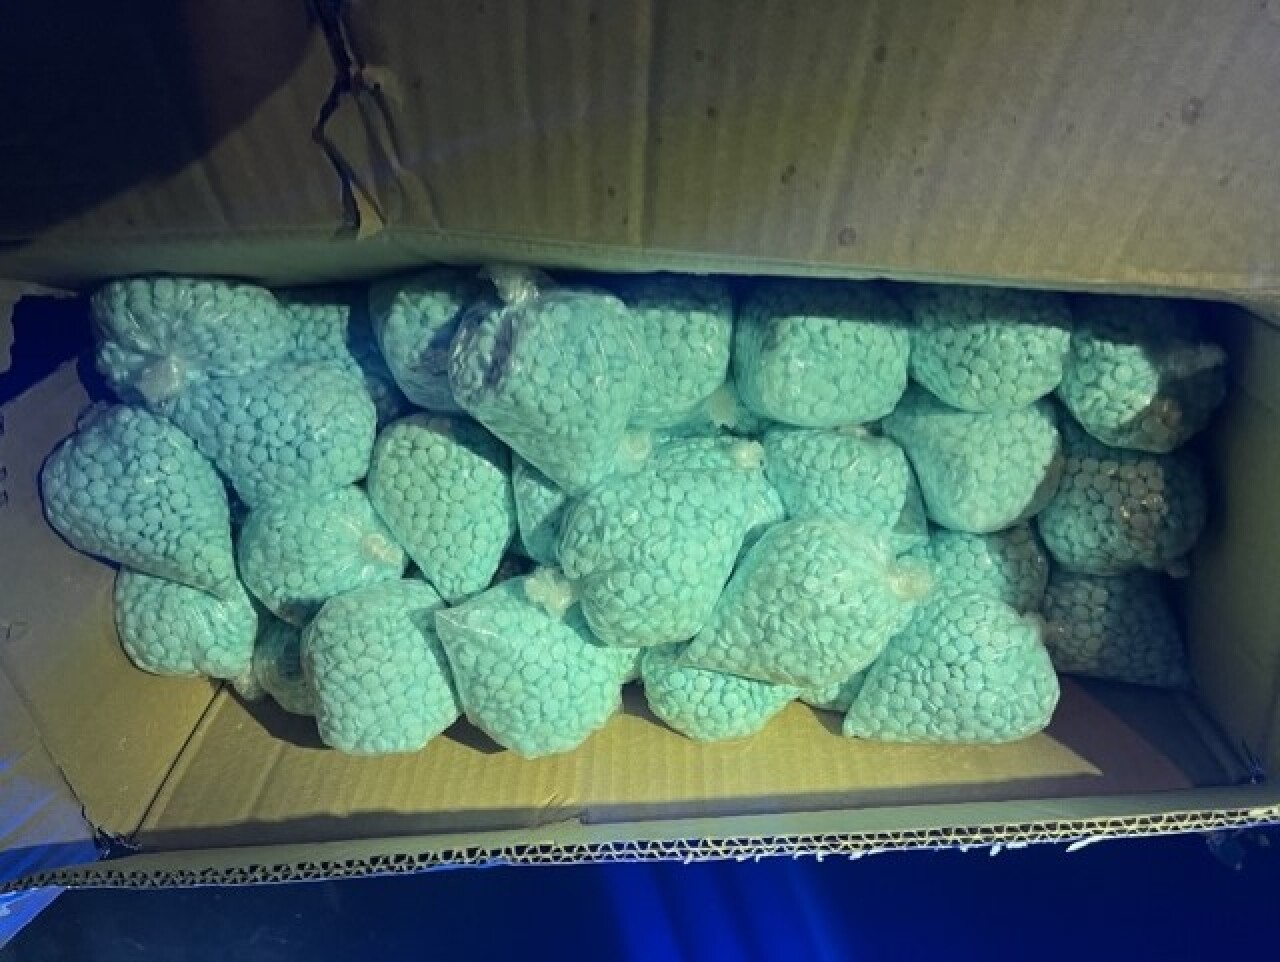 clear plastic bags of turquoise pills